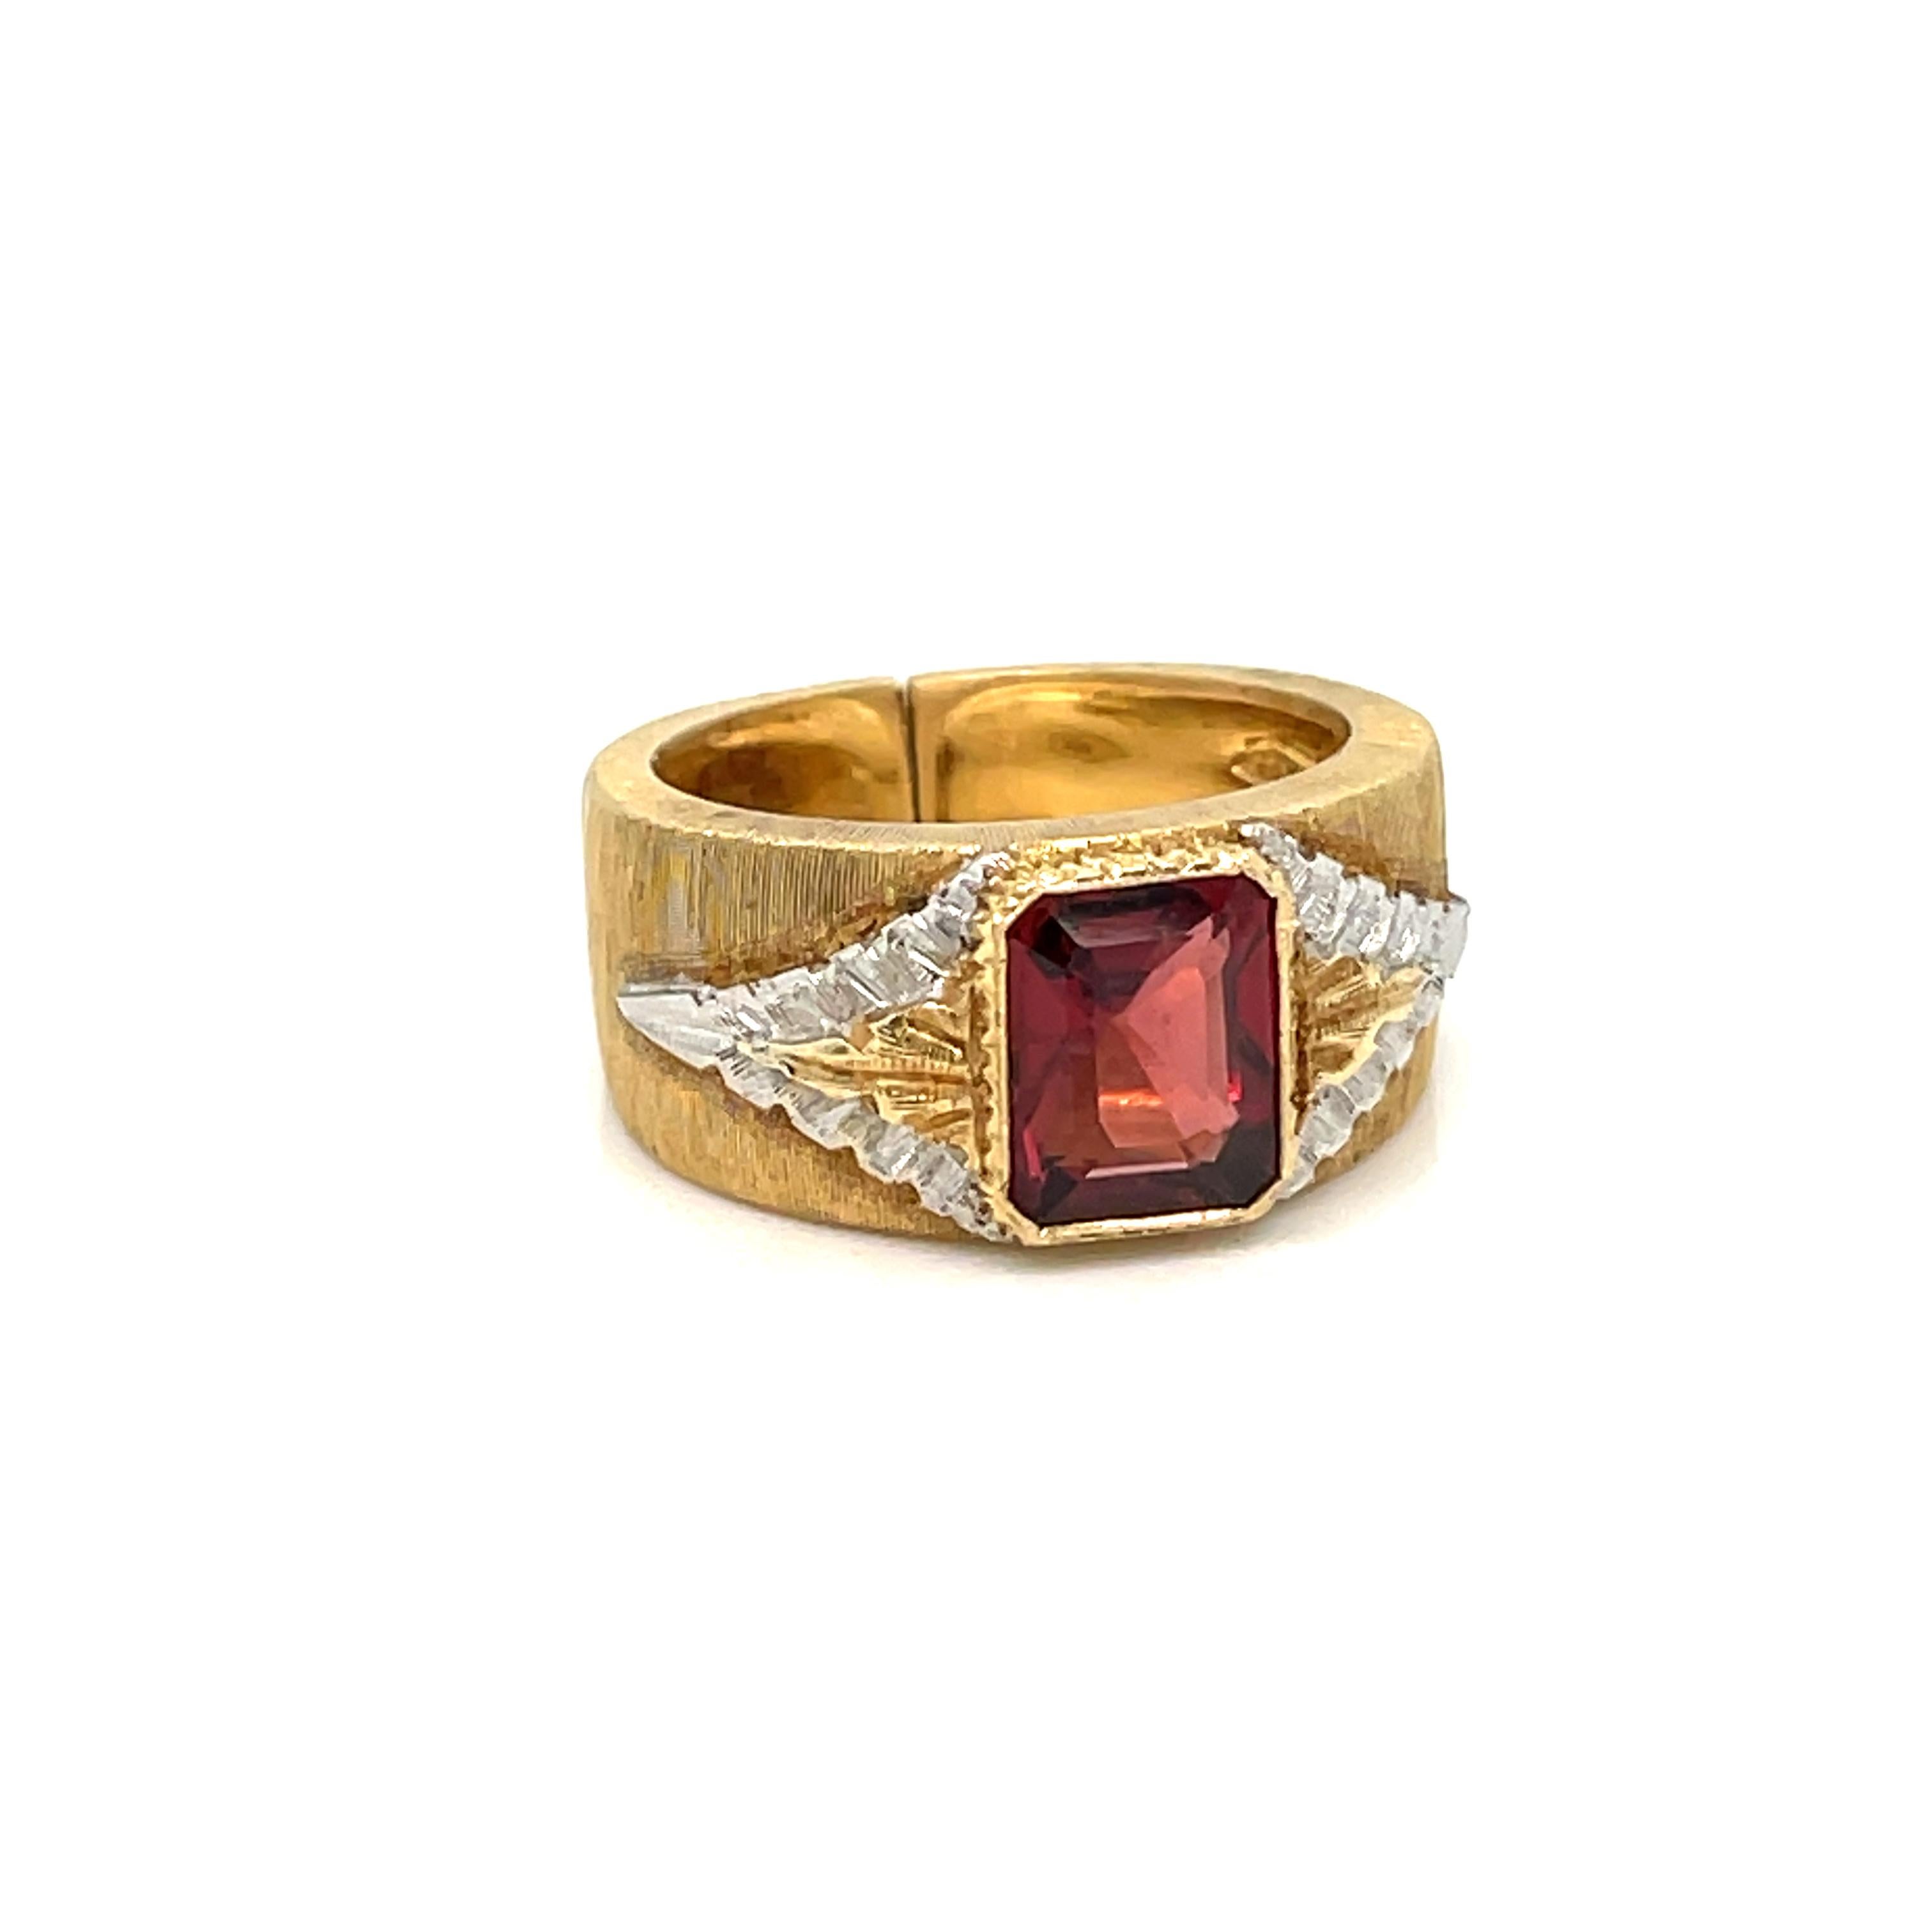 Beautiful Mario Buccellati Engraved ring, handcrafted in 18k yellow and white Gold, featuring in the center a natural Garnet, 2 carats  
Circa 1970

The magical iridescent effect of the gold surface, given by the very fine 